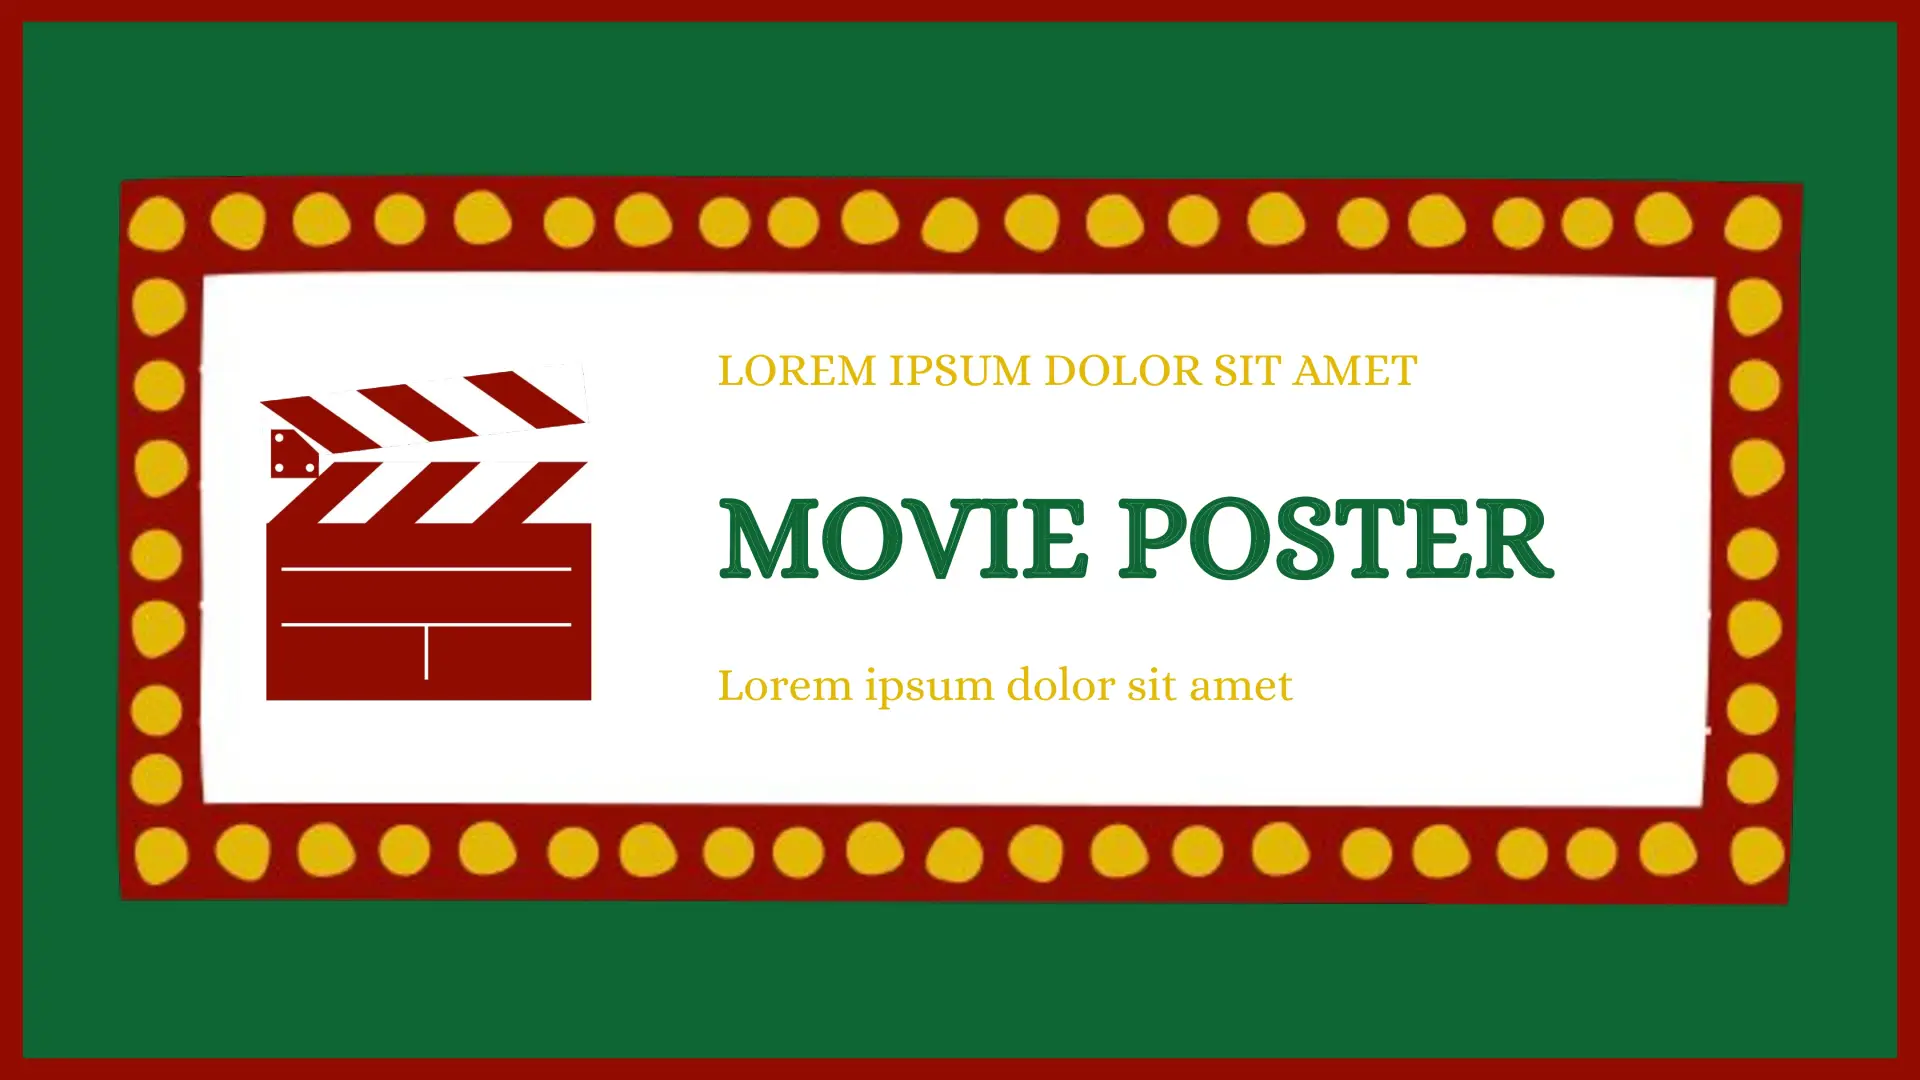 Movie Poster Template